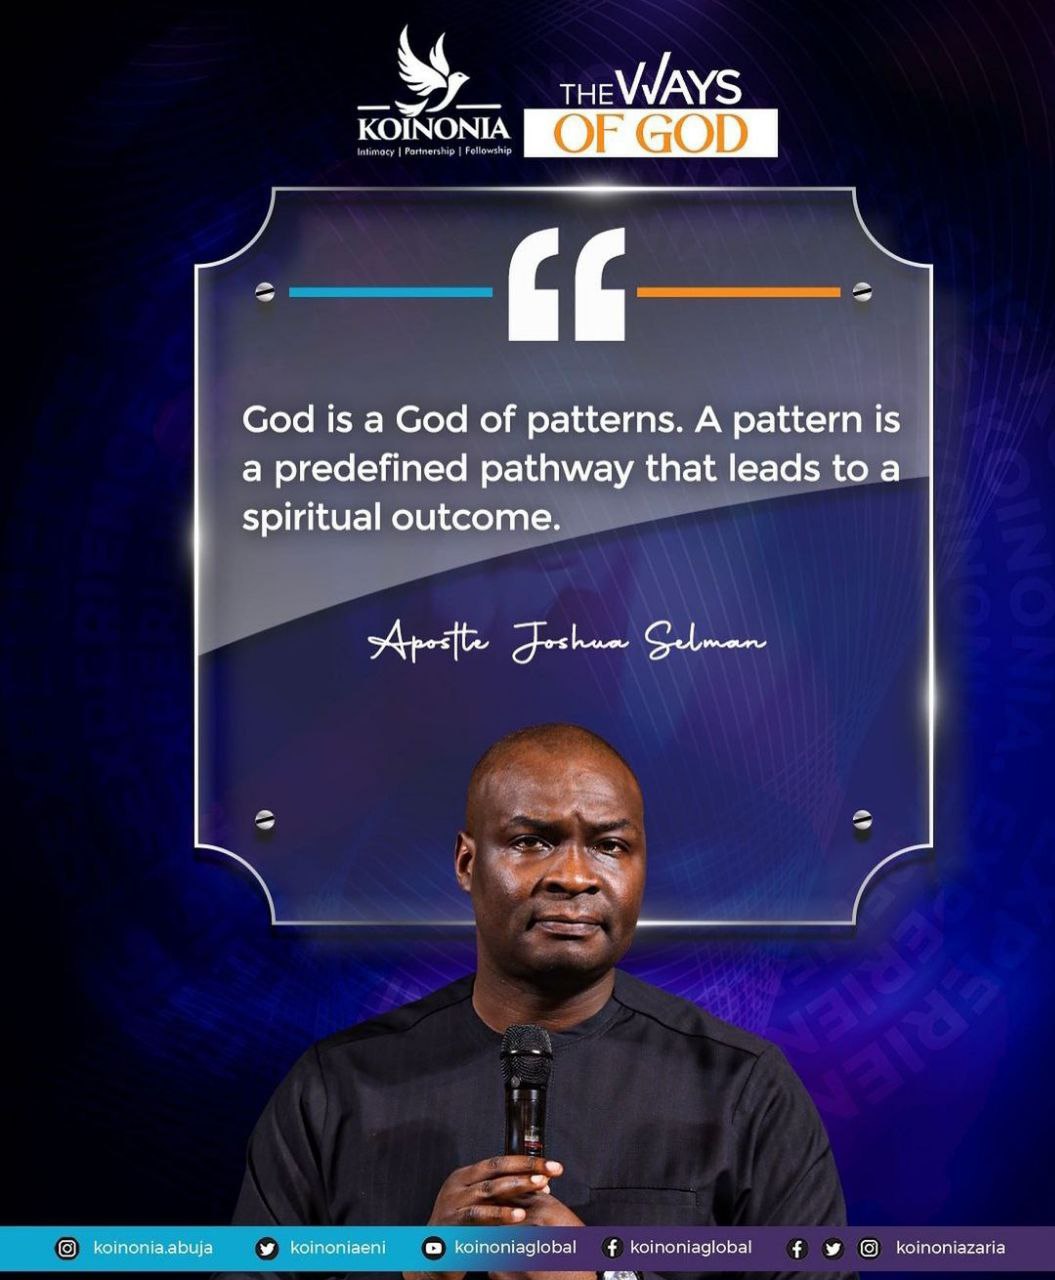 DOWNLOAD MP3: THE WAYS OF GOD by Apostle Joshua Selman (May 7, 2023) 4